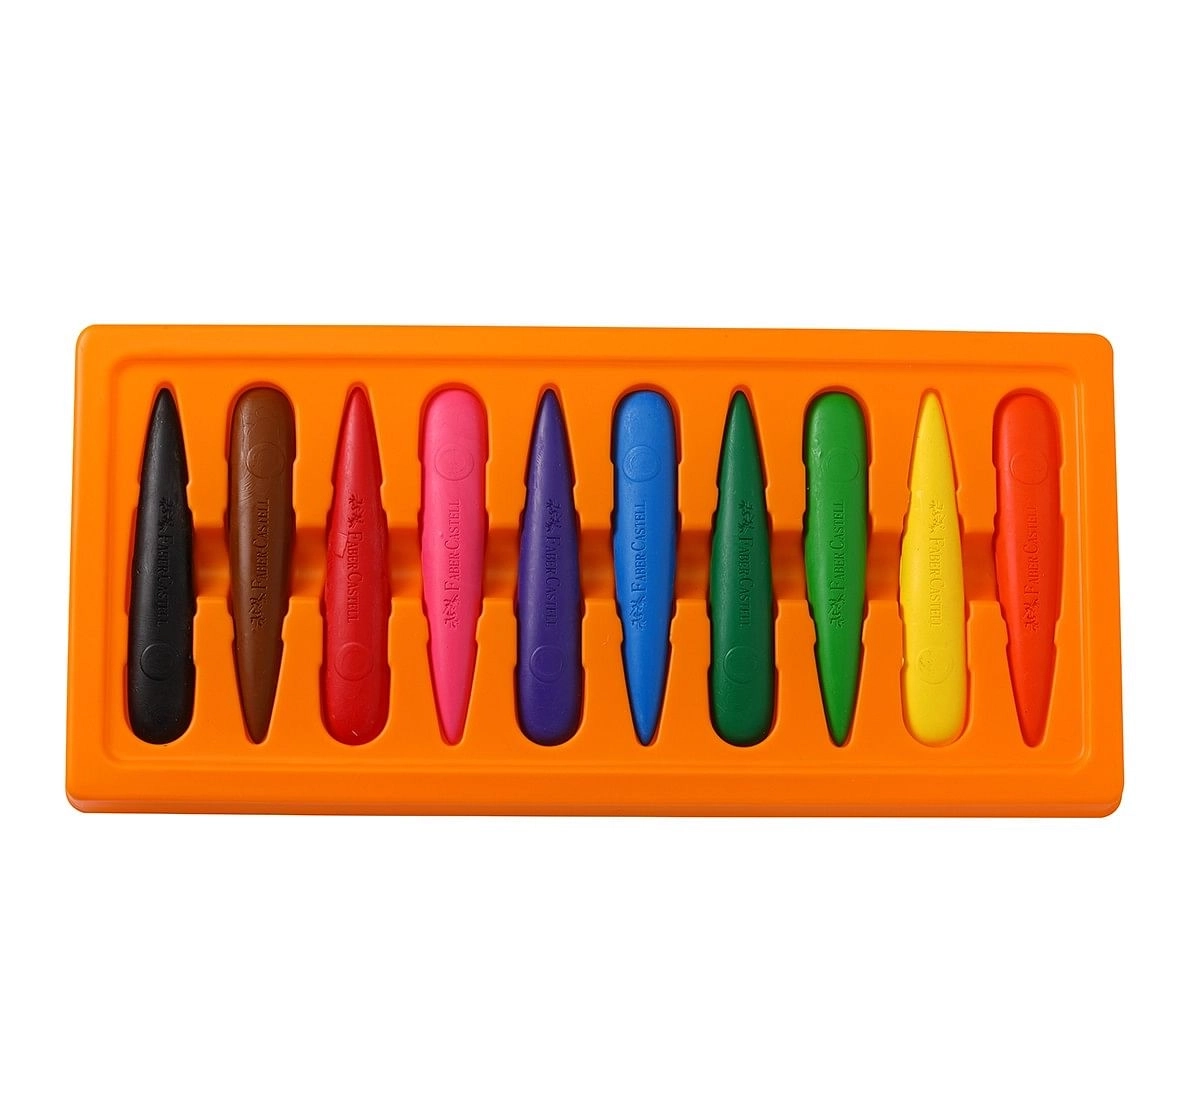 Faber-Castell 122710  first grip crayon set of 10, 3Y+